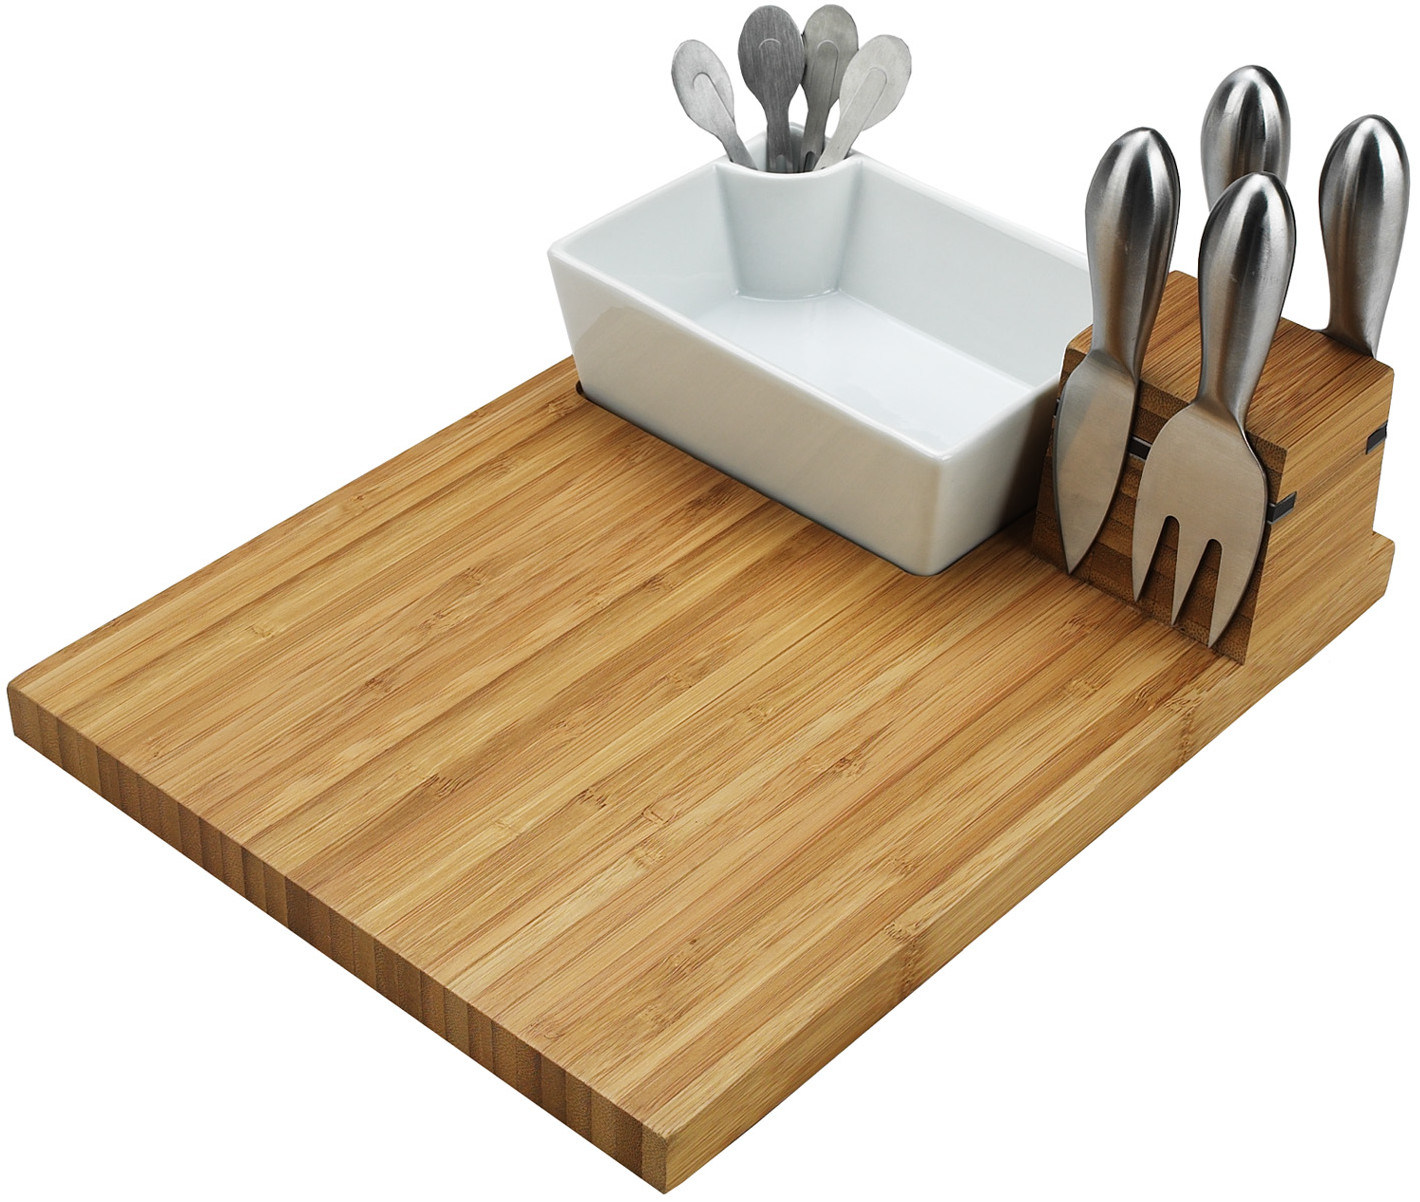 Bamboo Cheese Board Set with Knives and Tray